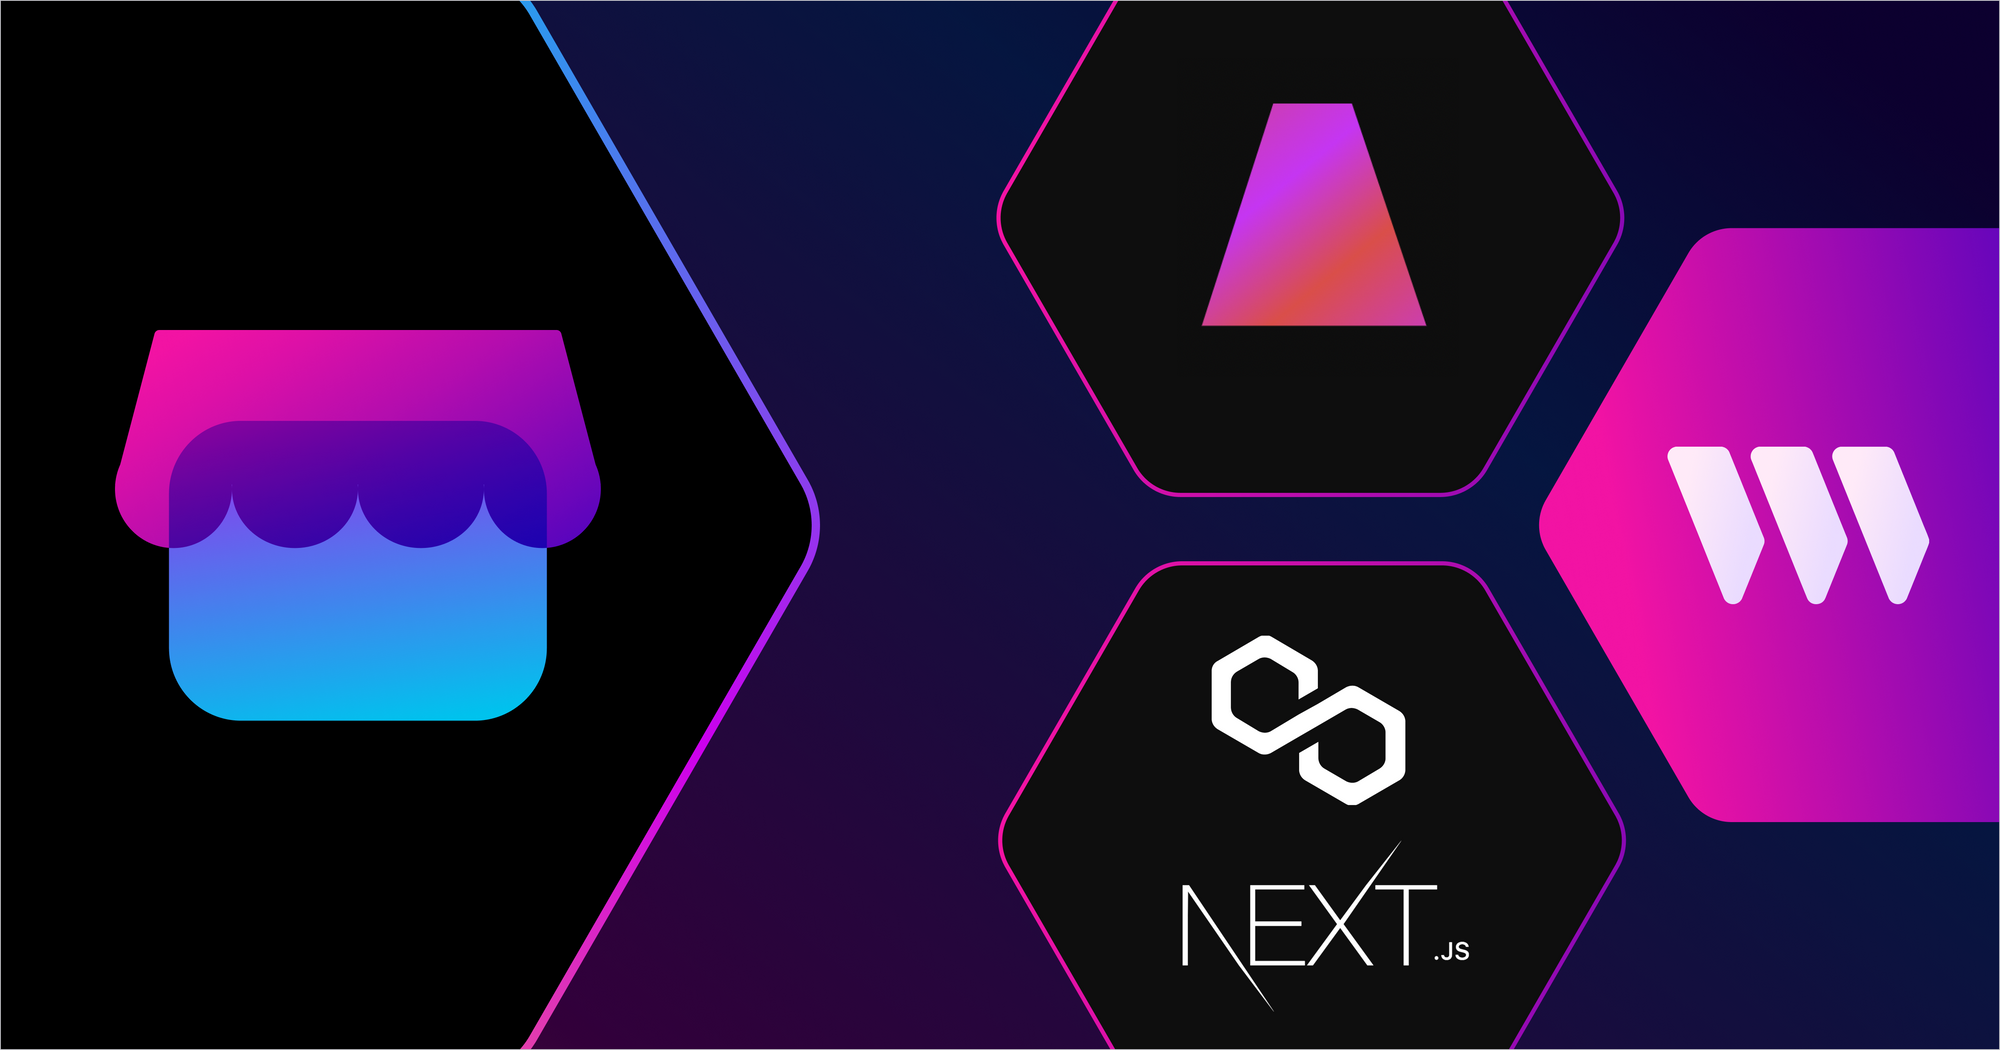 How to Create an NFT Marketplace with Next.js and thirdweb on Polygon